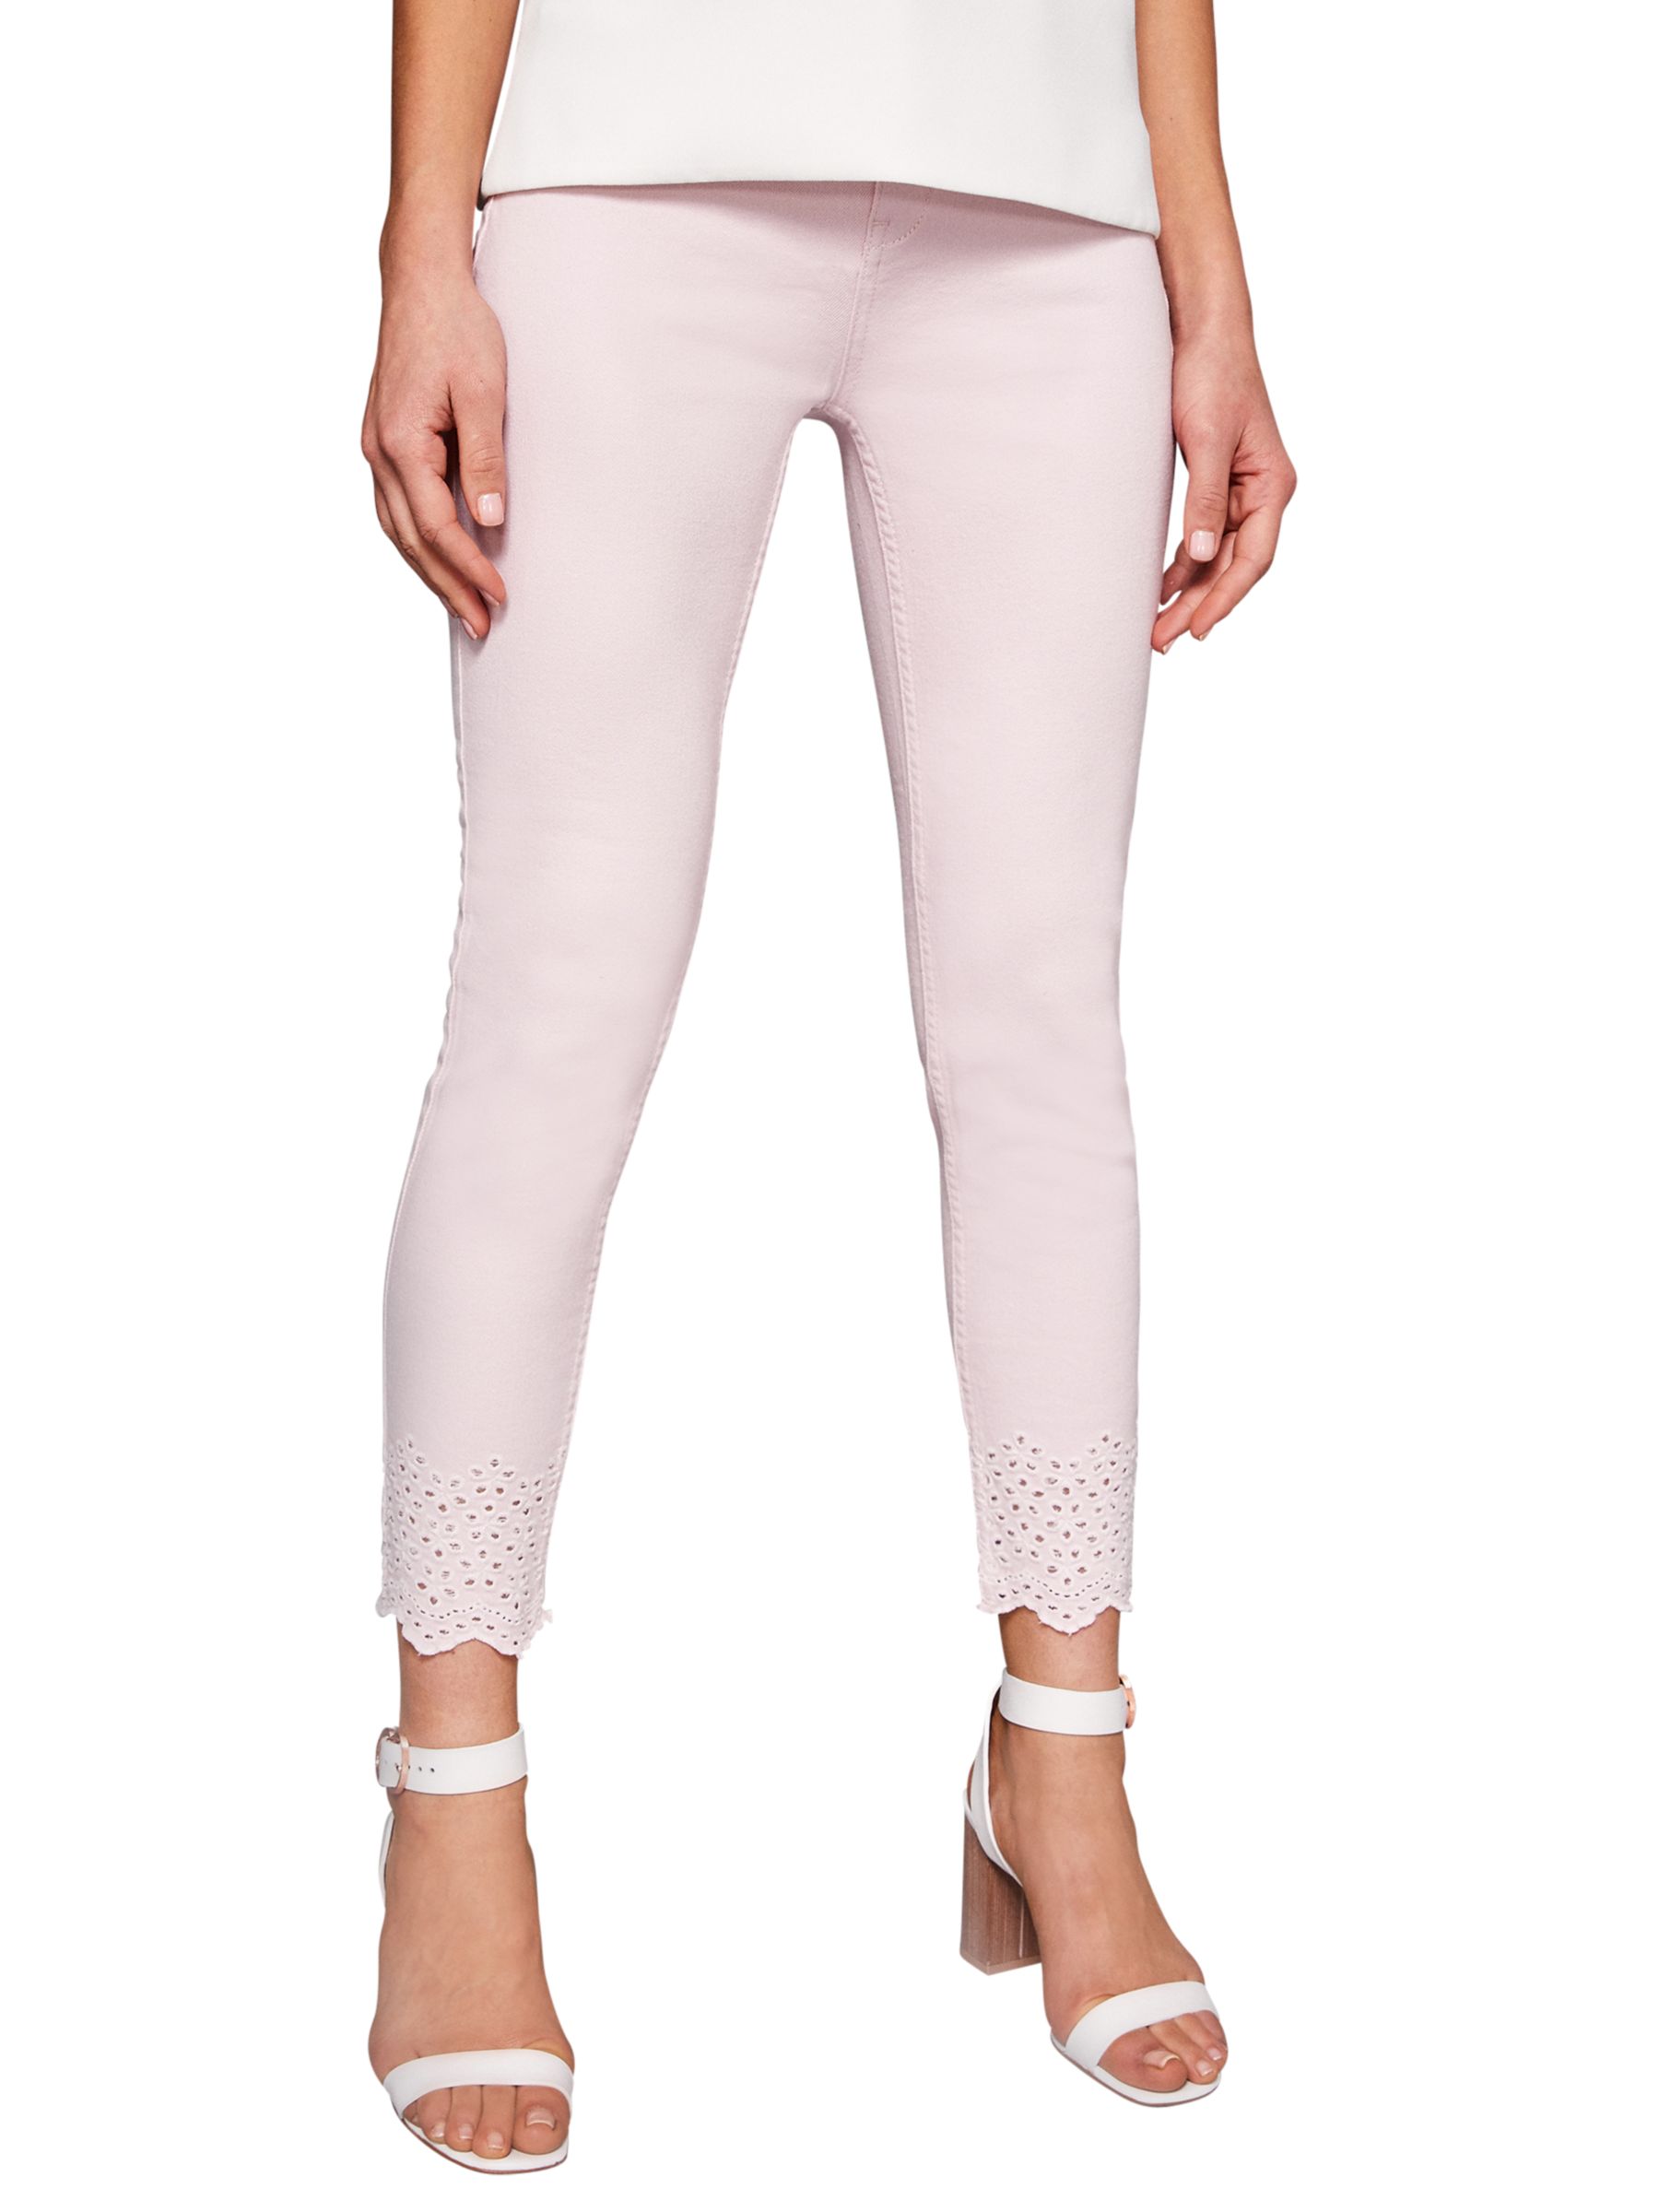 ted baker baby jeans